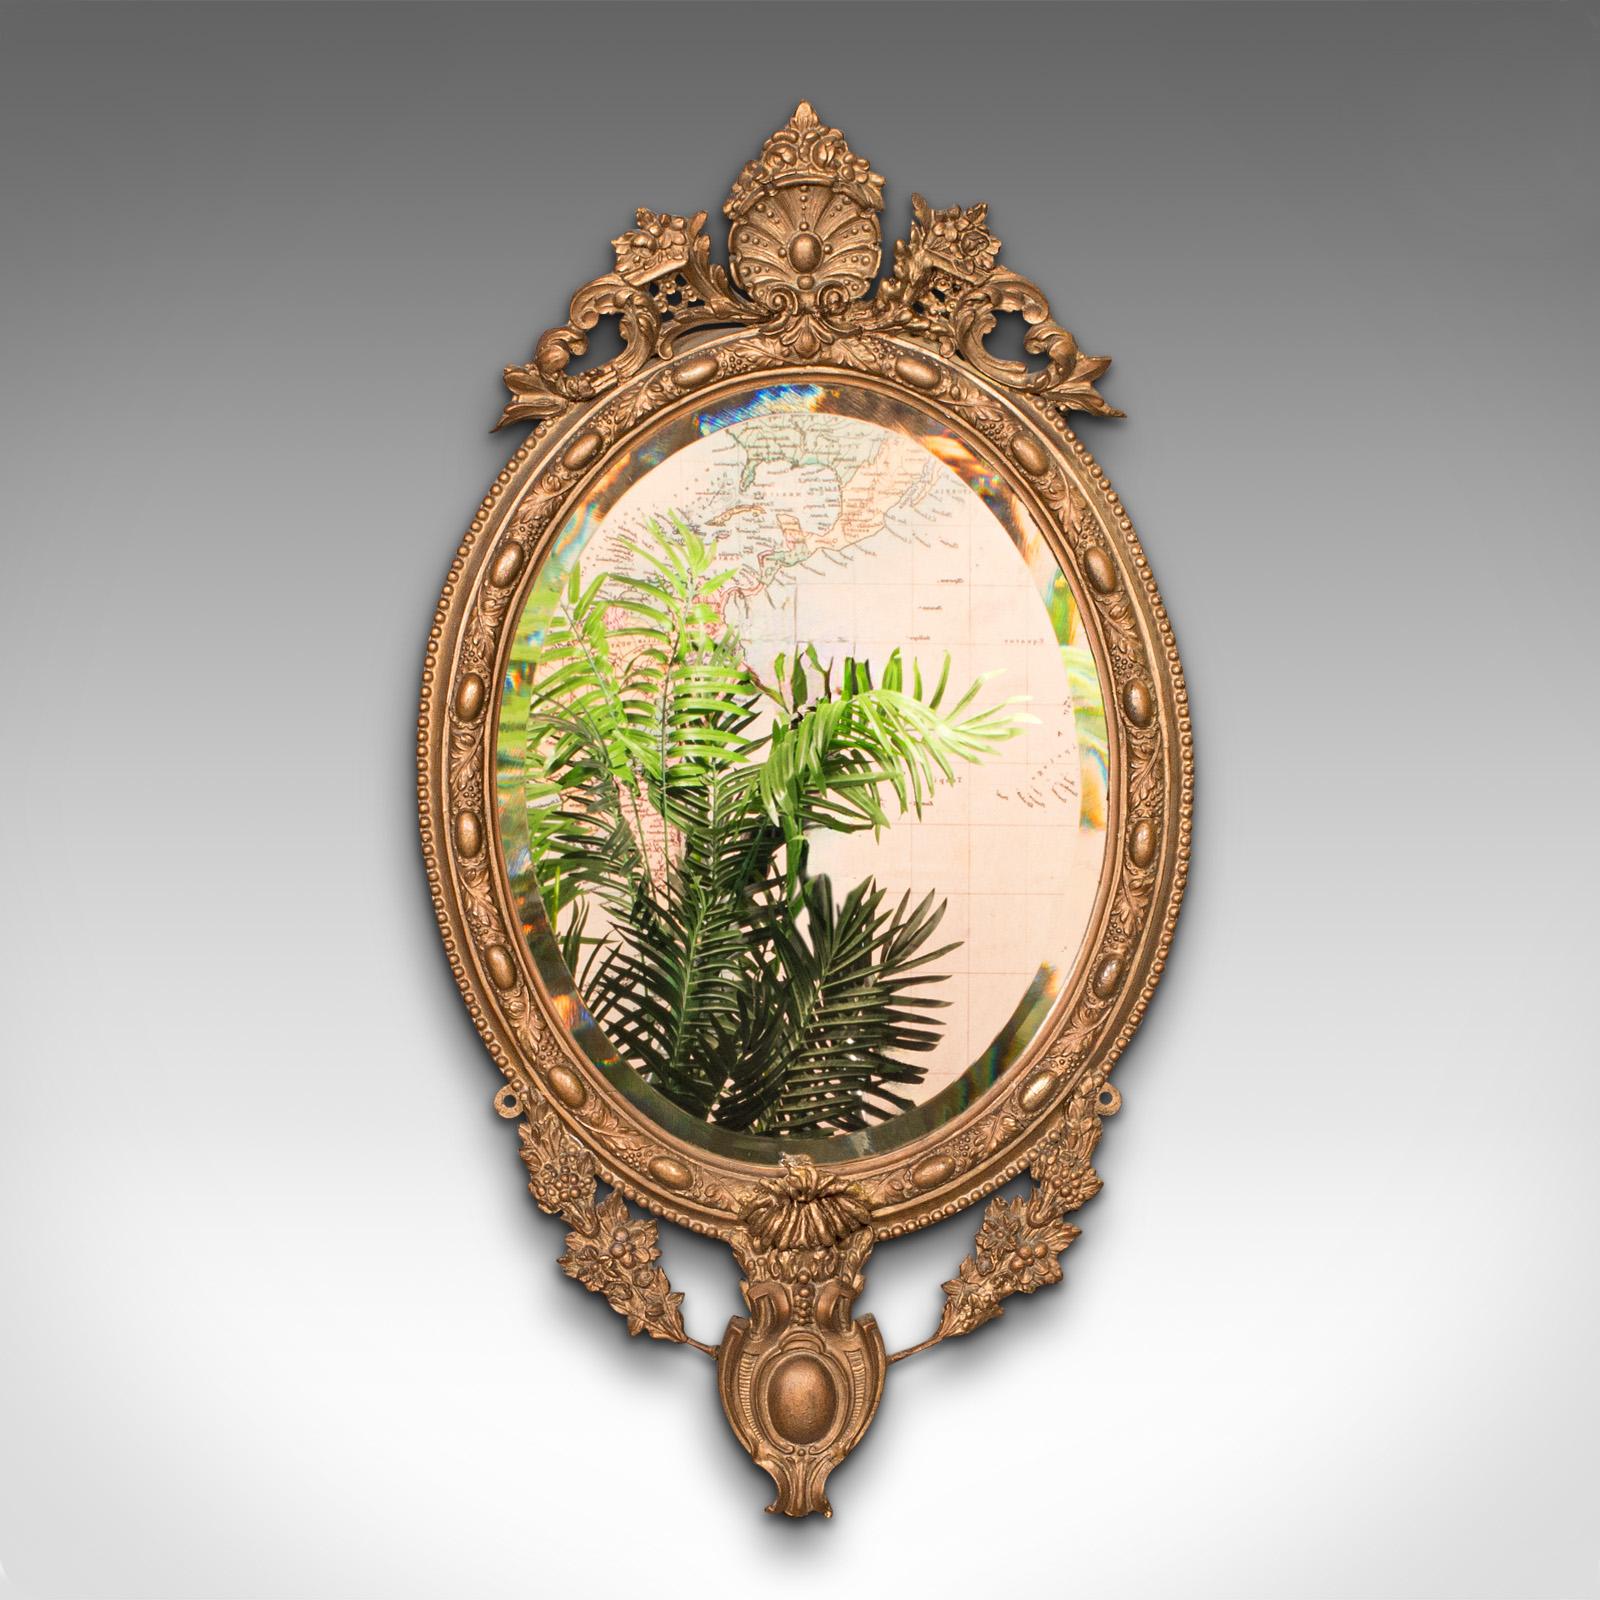 This is an antique ornate wall mirror. A French, gilt gesso and bevelled glass mirror, dating to the late Victorian period, circa 1900.

Dashing wall mirror with an ornate continental elegance
Displays a desirable aged patina and in good original